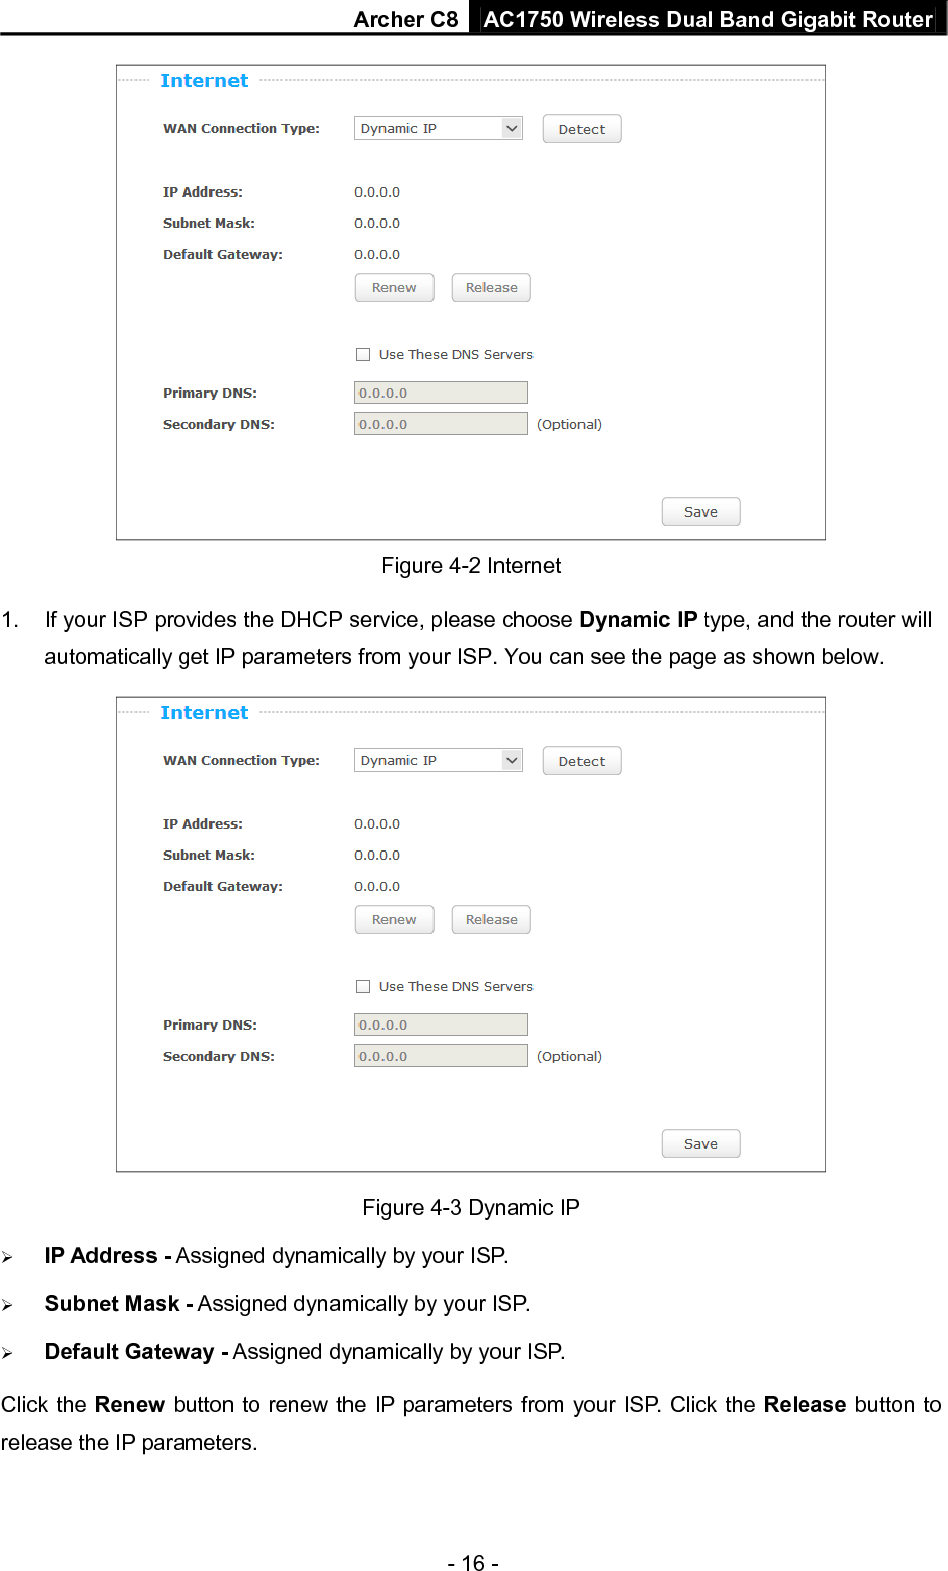 Archer C8 AC1750 Wireless Dual Band Gigabit Router  - 16 -  Figure 4-2 Internet 1. If your ISP provides the DHCP service, please choose Dynamic IP type, and the router will automatically get IP parameters from your ISP. You can see the page as shown below.  Figure 4-3 Dynamic IP  IP Address - Assigned dynamically by your ISP.  Subnet Mask - Assigned dynamically by your ISP.  Default Gateway - Assigned dynamically by your ISP. Click the Renew button to renew the IP parameters from your ISP. Click the Release button to release the IP parameters. 